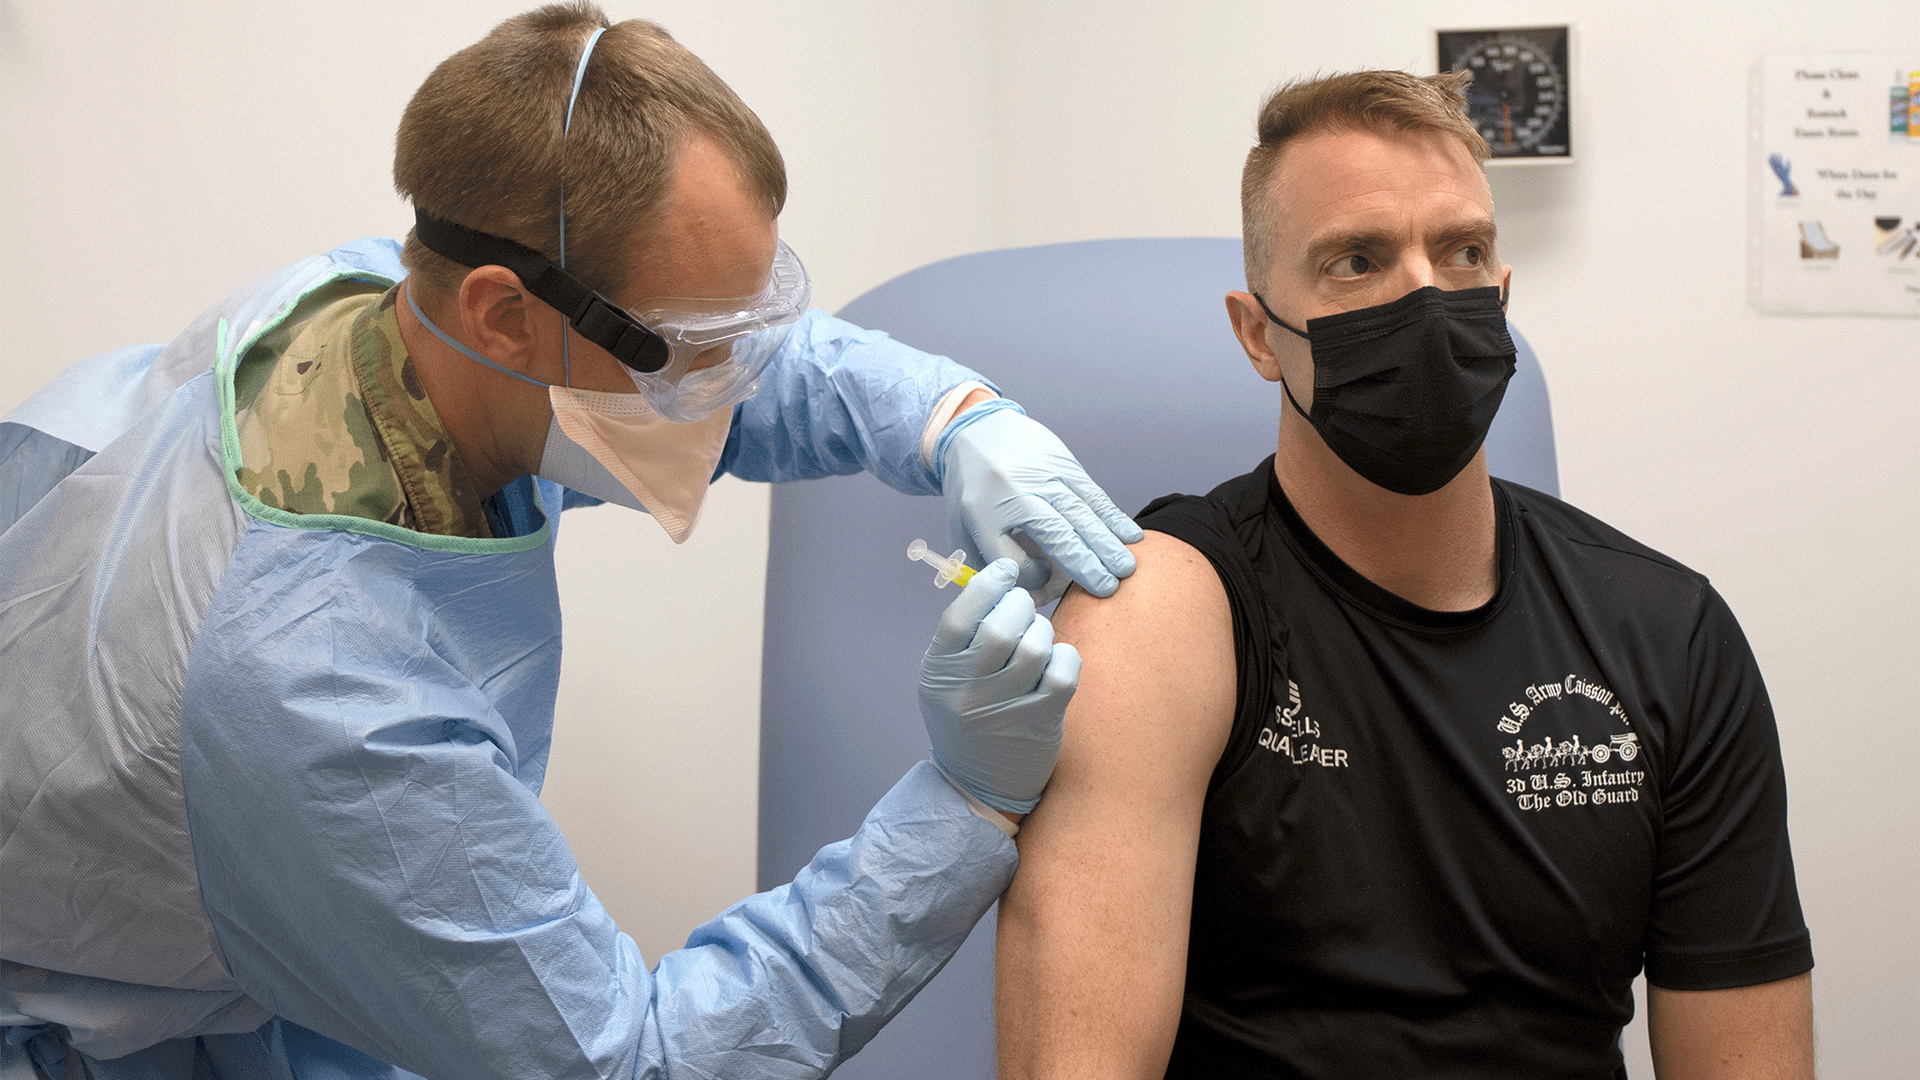 Army captain in scrubs administers COVID-19 vaccine to man in black shirt